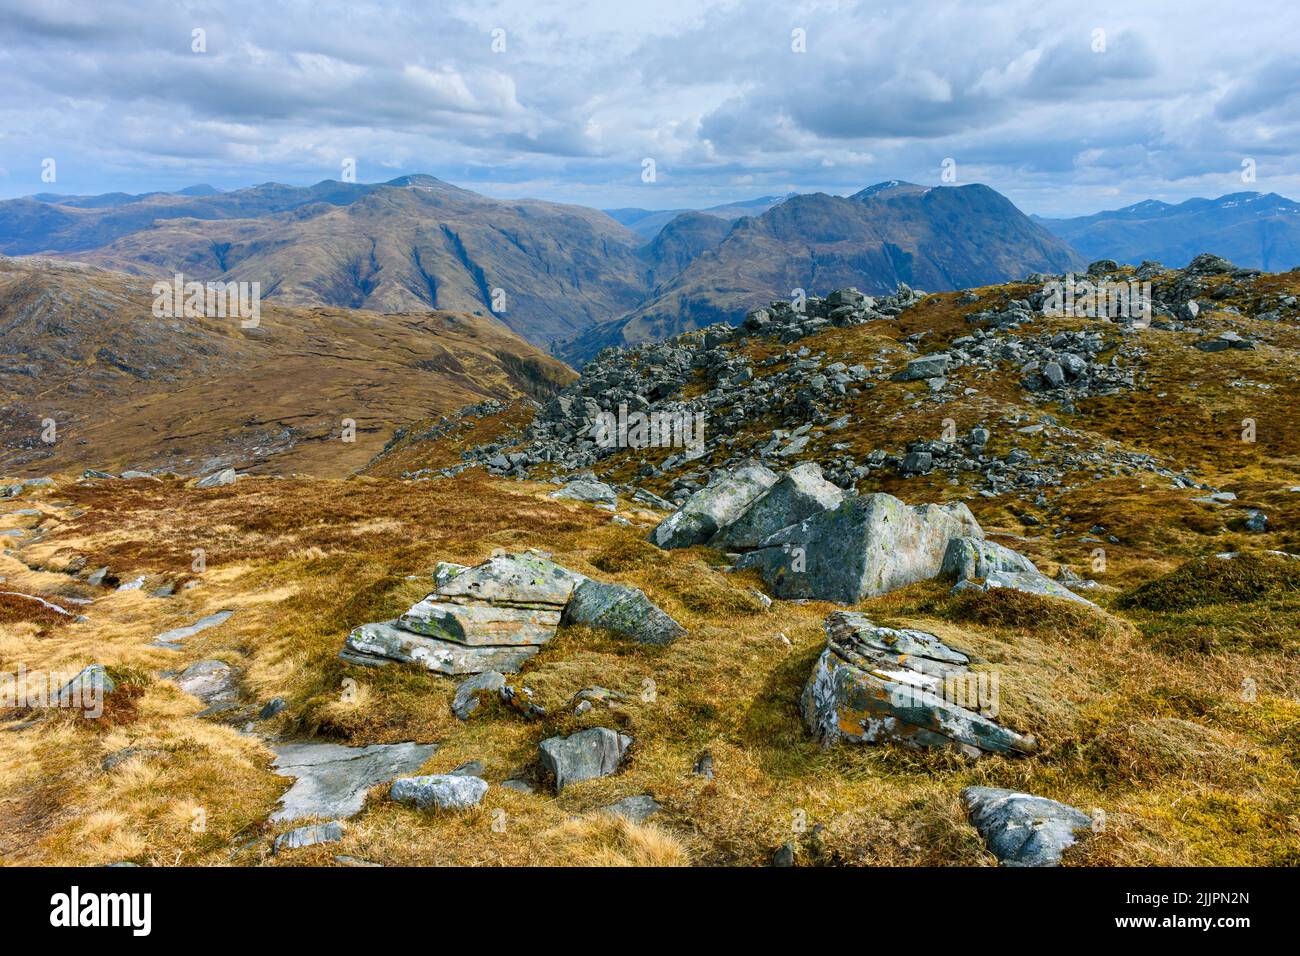 The peaks of Kintail Forest from the summit of Sgurr an Airgid, Kintail, Highland Region, Scotland, UK Stock Photo